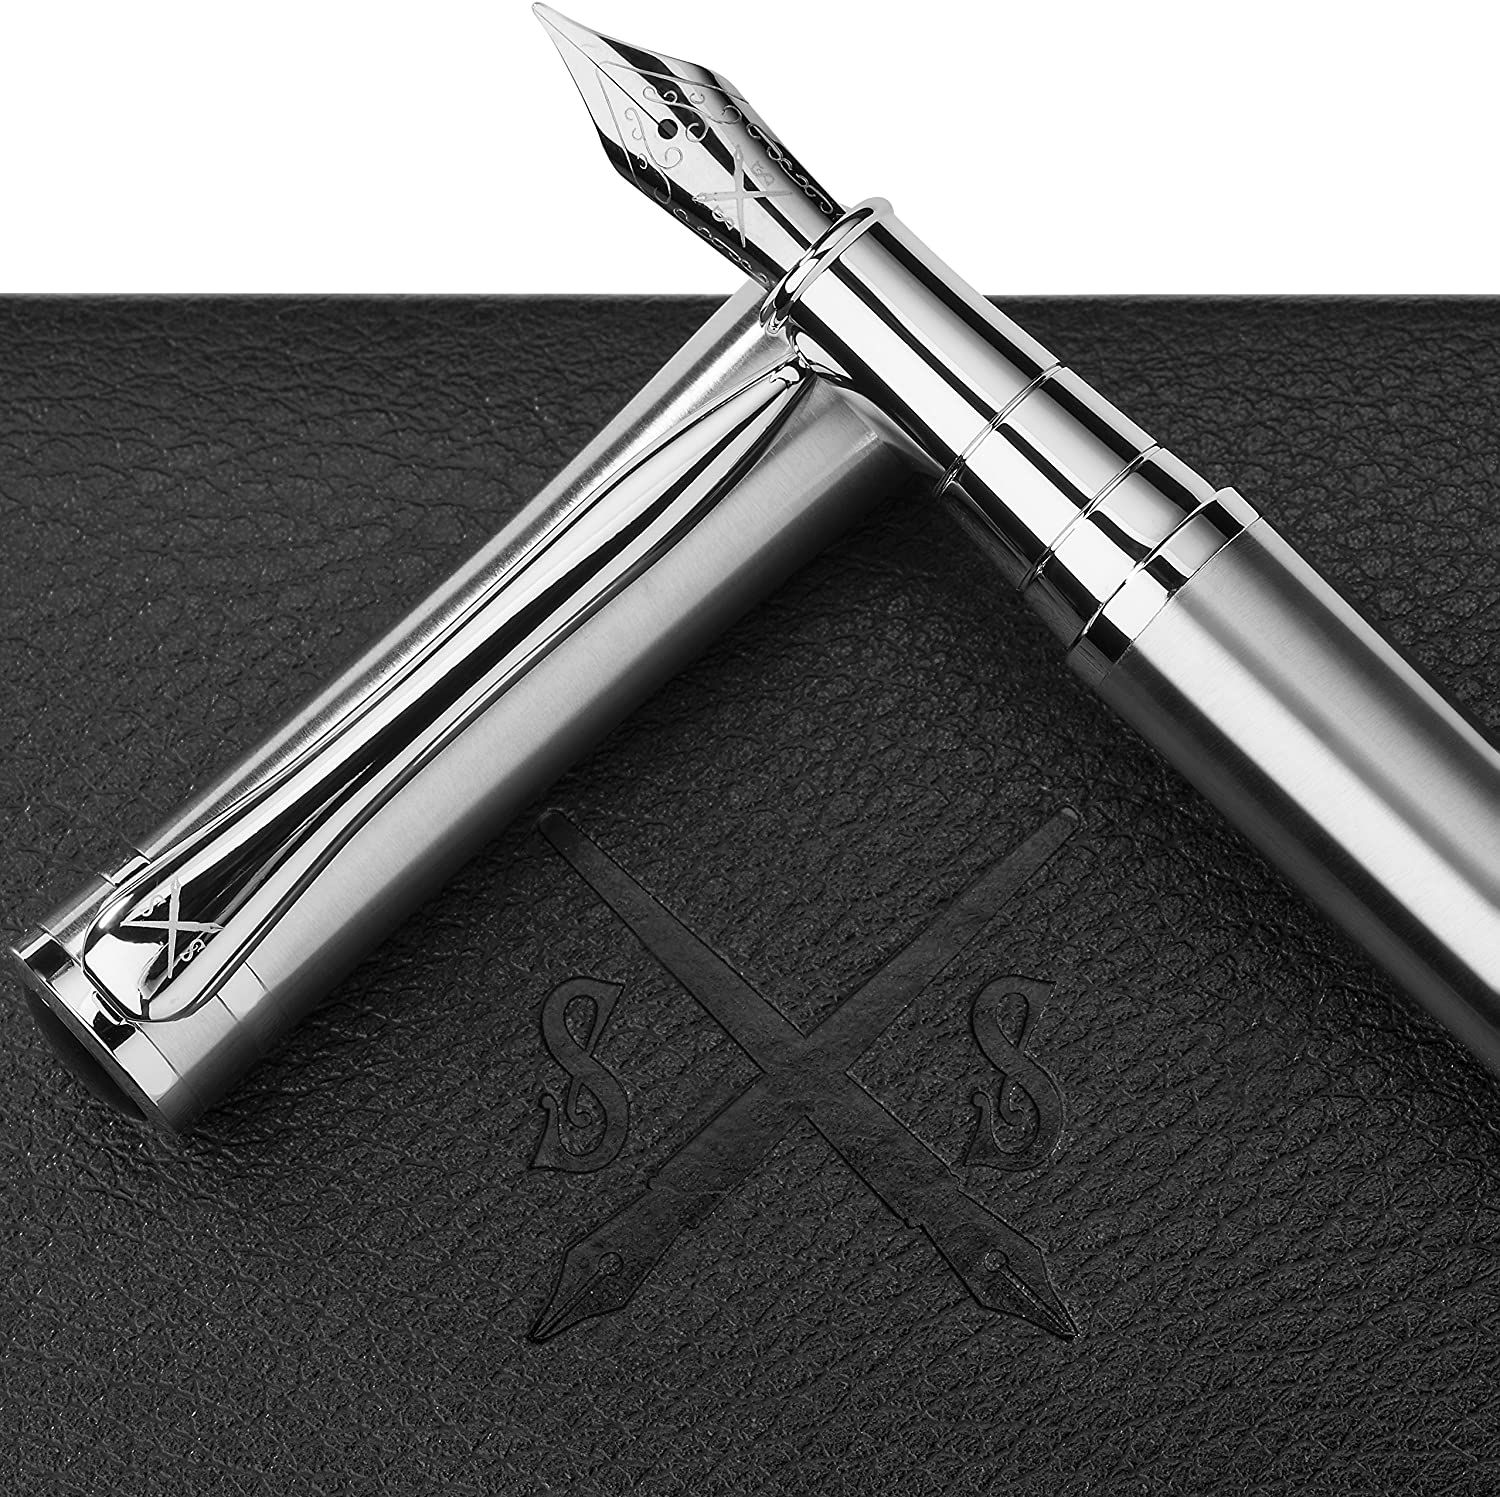 Scribe Sword Fountain Pen - Highest Possible Quality - Best Calligraphy Pens For Smooth Elegant Writing - Business Luxury Gift Box - Perfect For Gifts